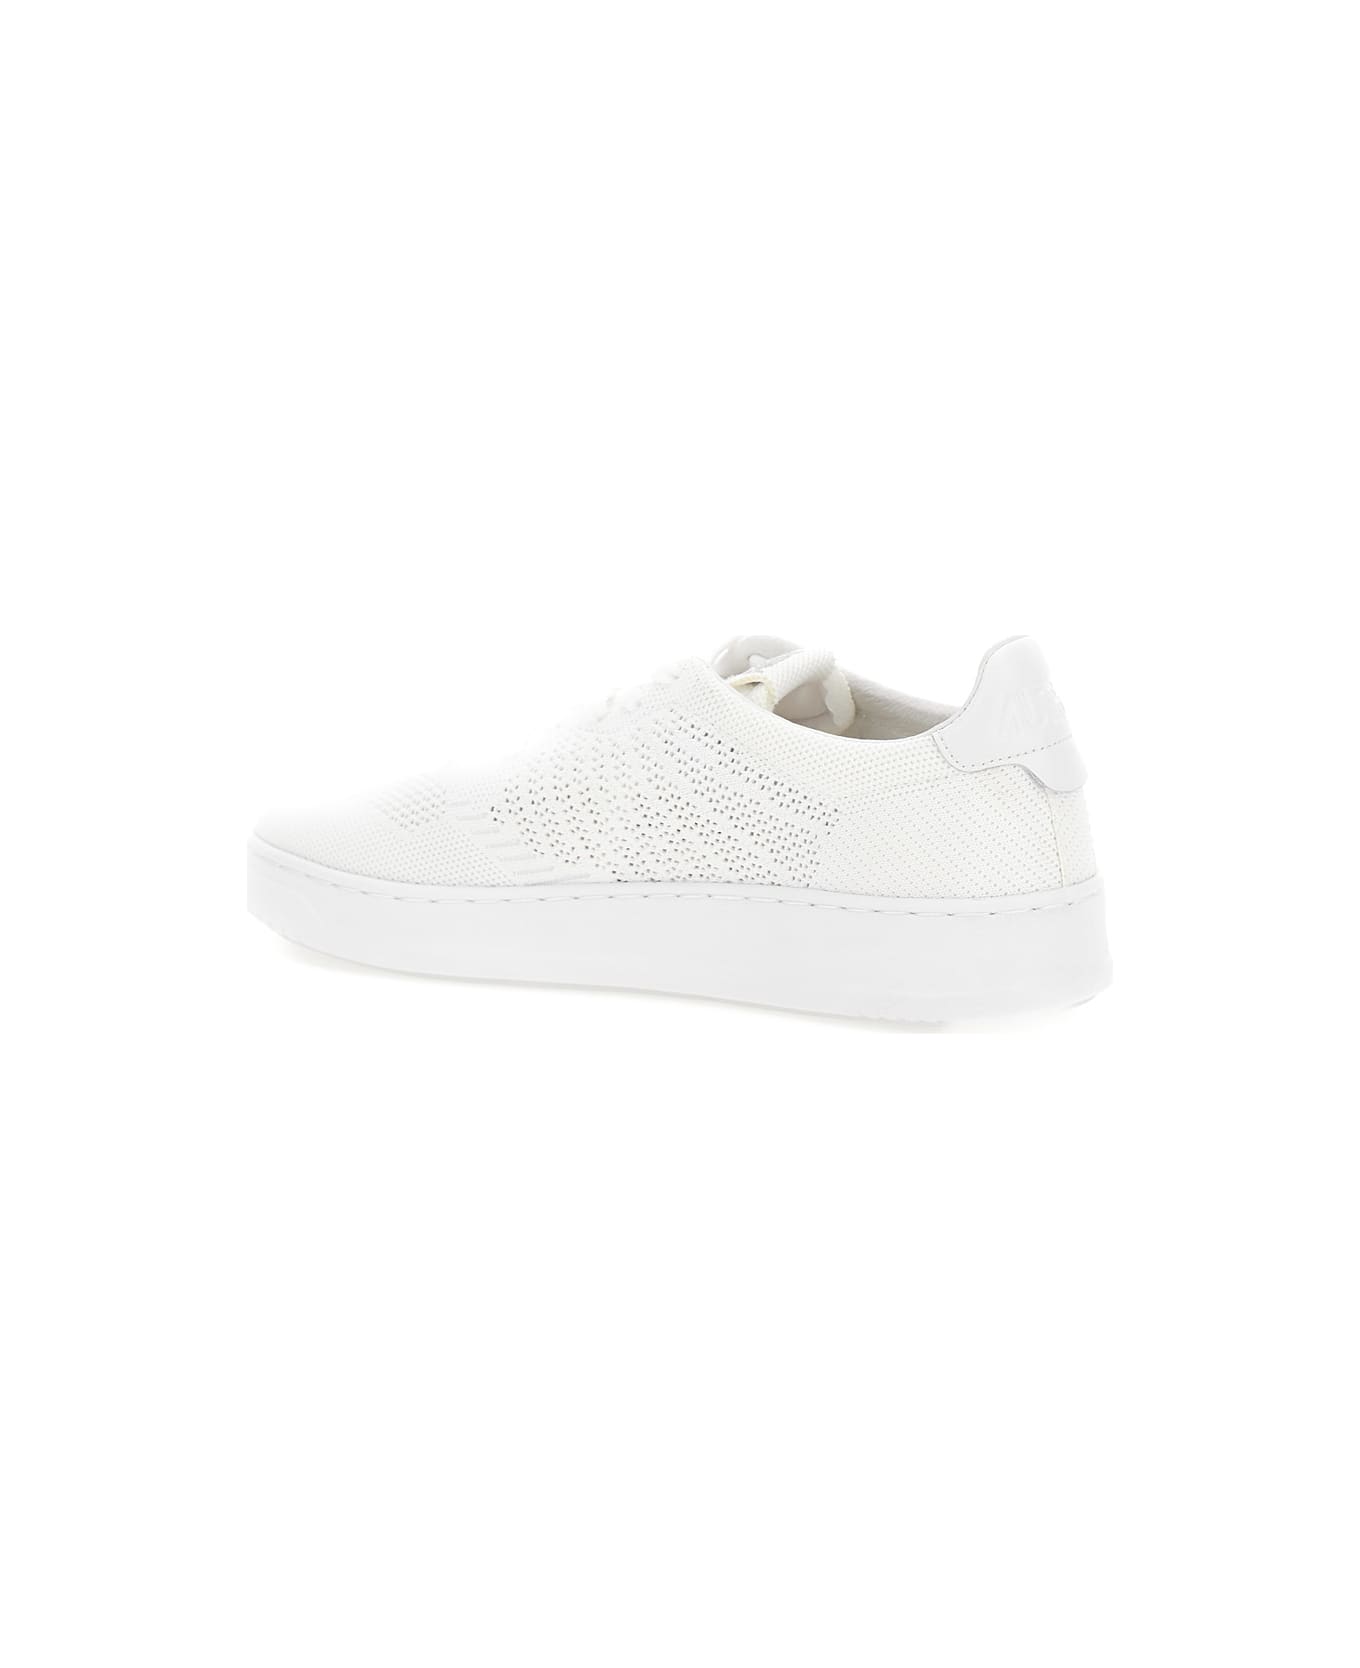 Autry 'medalist Easeknit' White Low Top Sneakers With Perforated Design In Knit Man - White